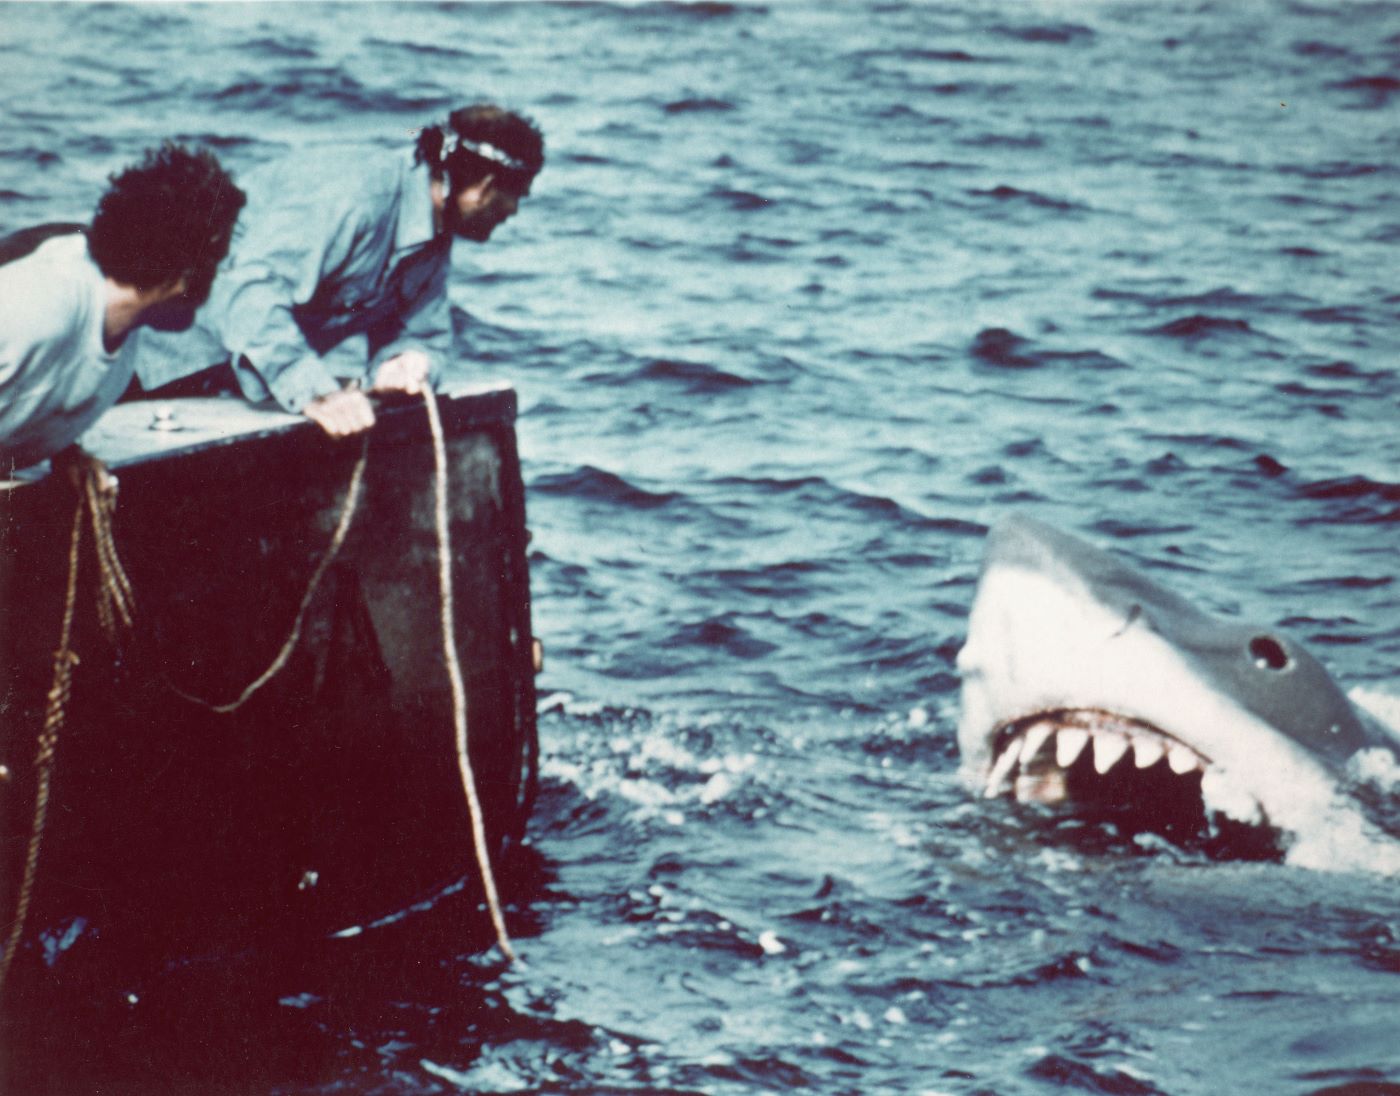 Scene from Steven Spielberg's 'Jaws' with the shark coming out of the ocean and two men leaving over the bow of the boat to look.